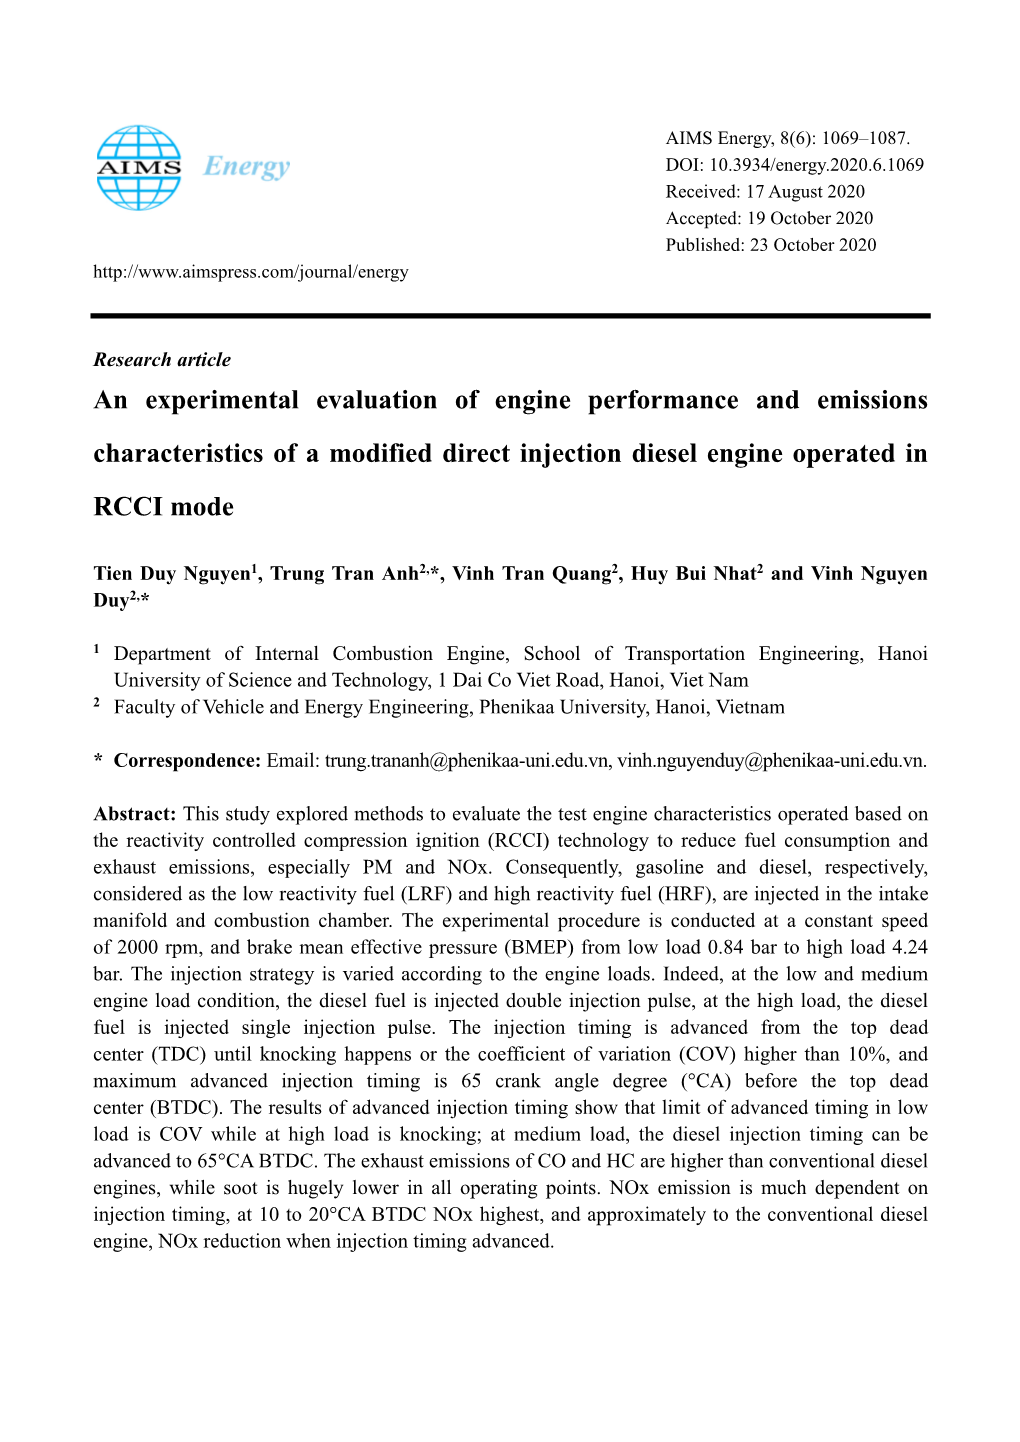 An Experimental Evaluation of Engine Performance and Emissions Characteristics of a Modified Direct Injection Diesel Engine Operated in RCCI Mode